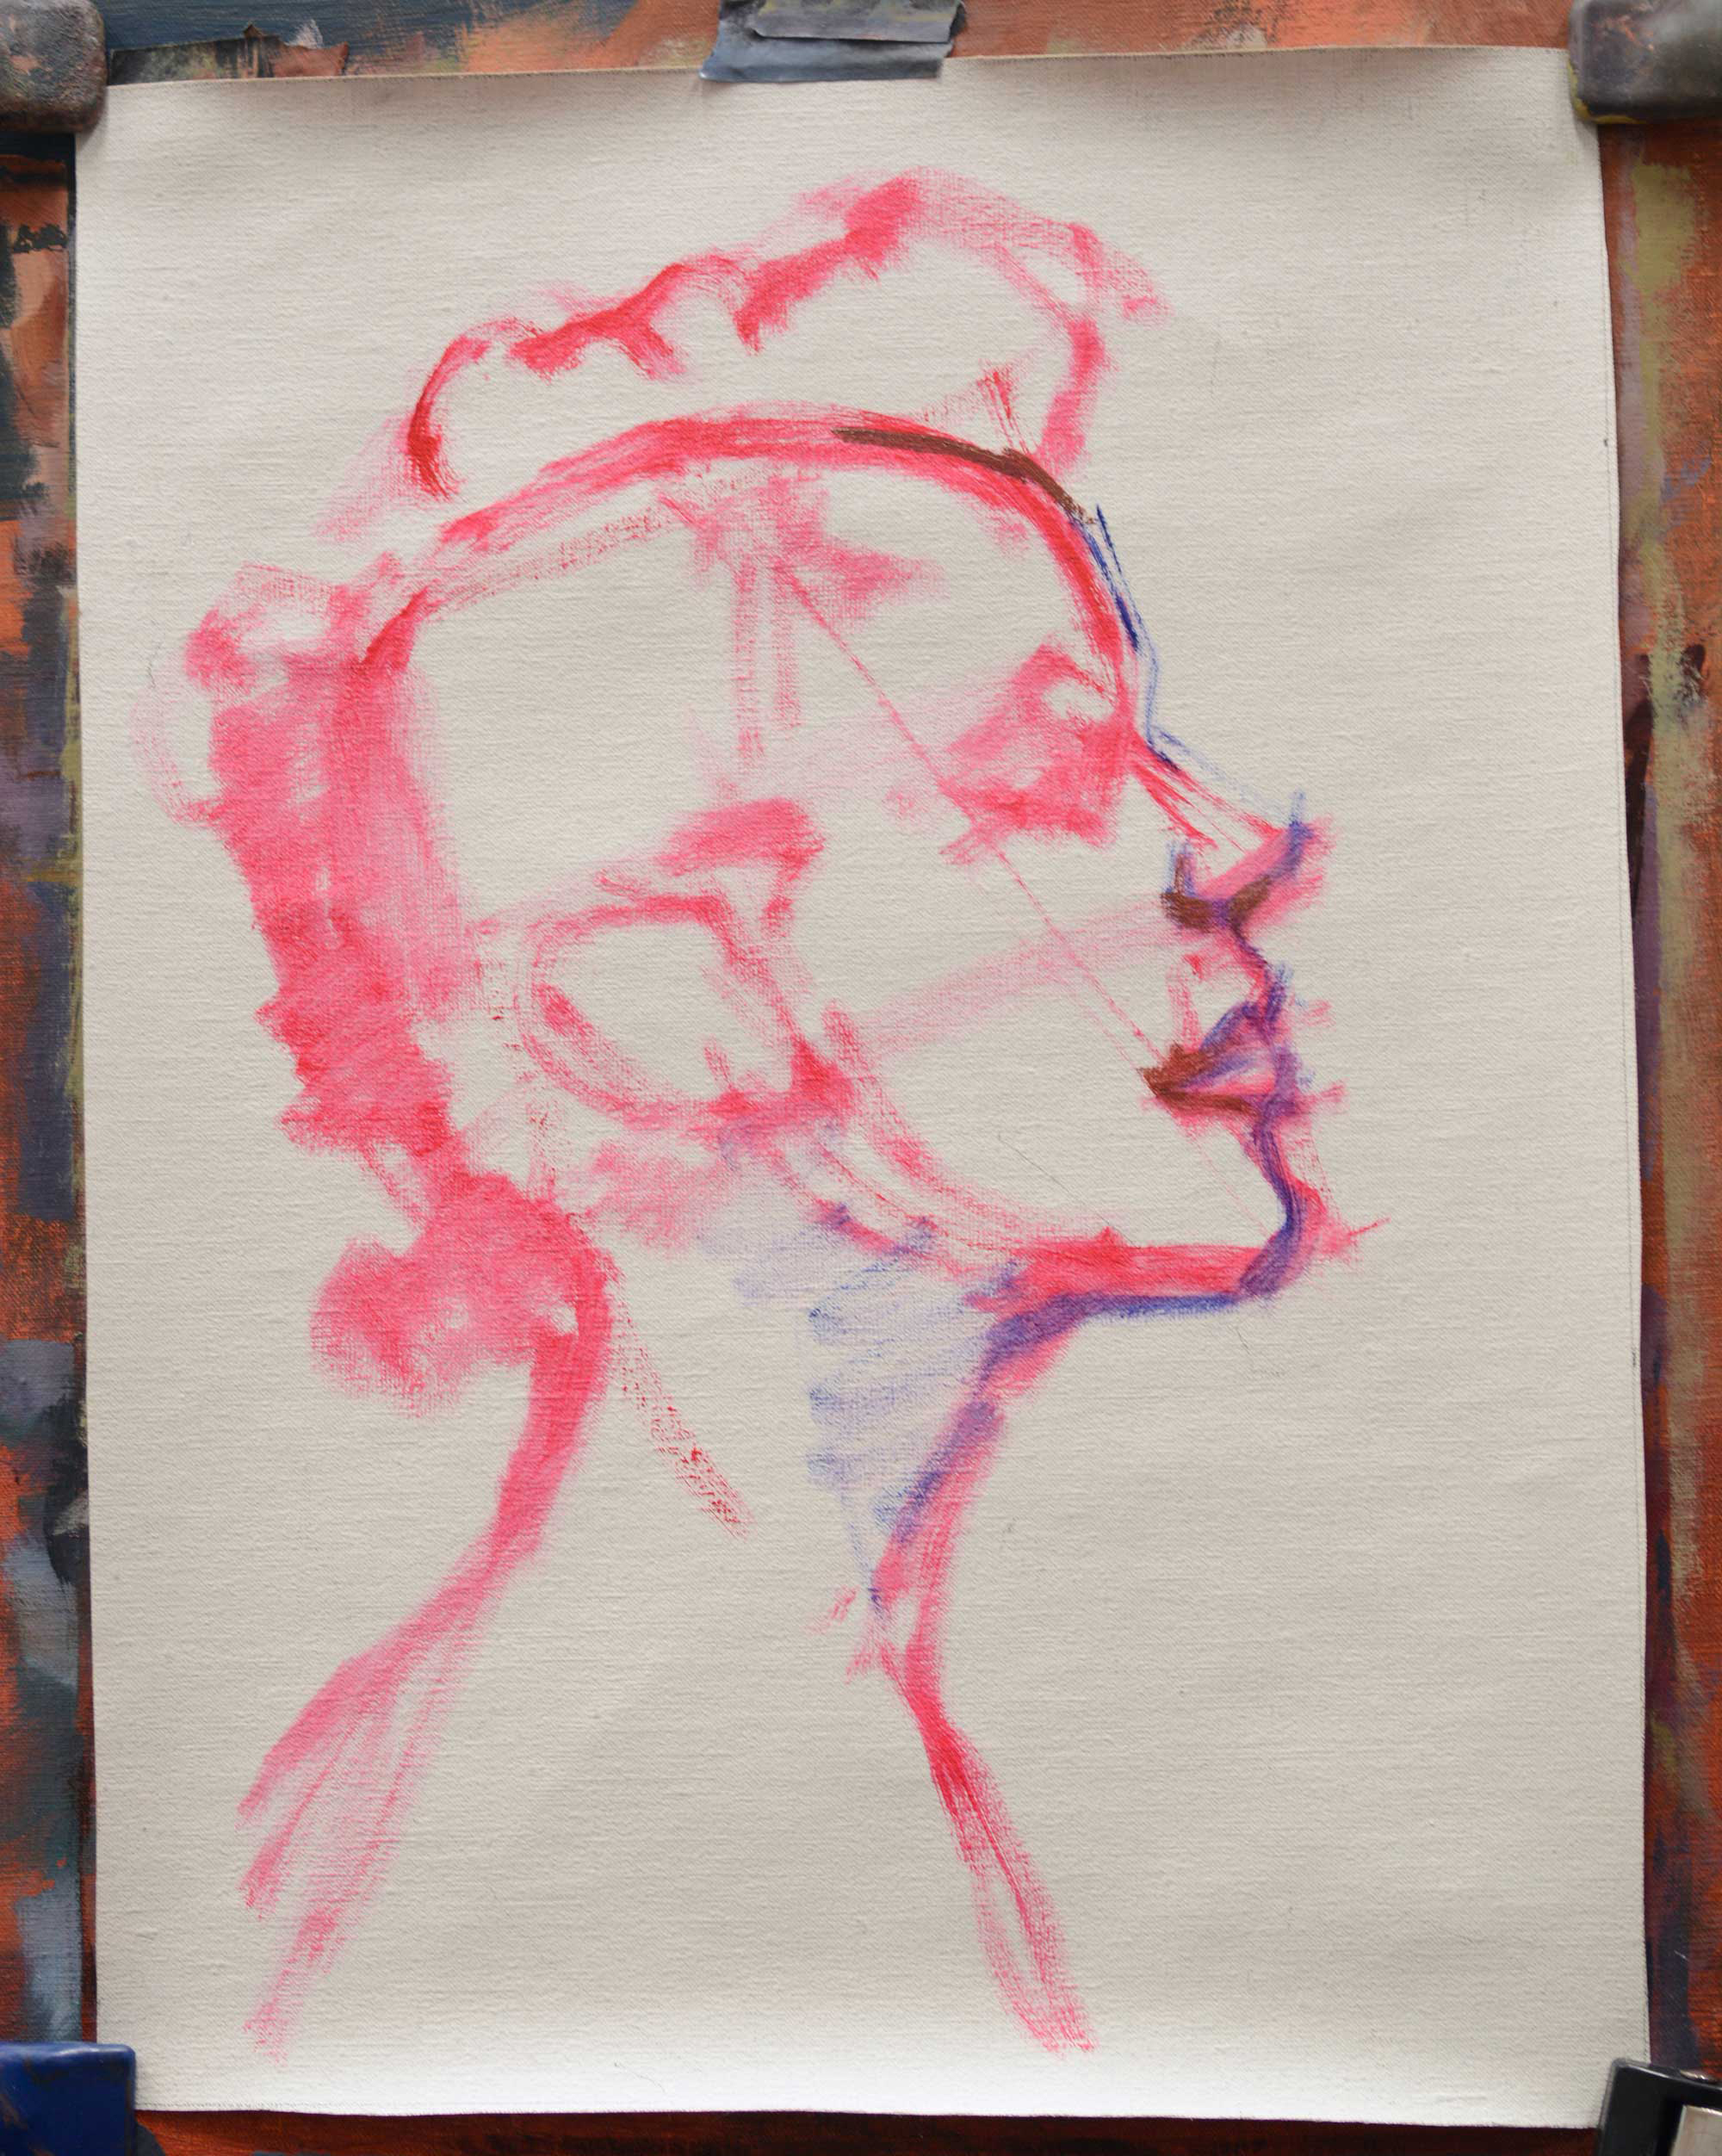 Artist canvas with rough sketch in a bright paint of a head in profile with more details added